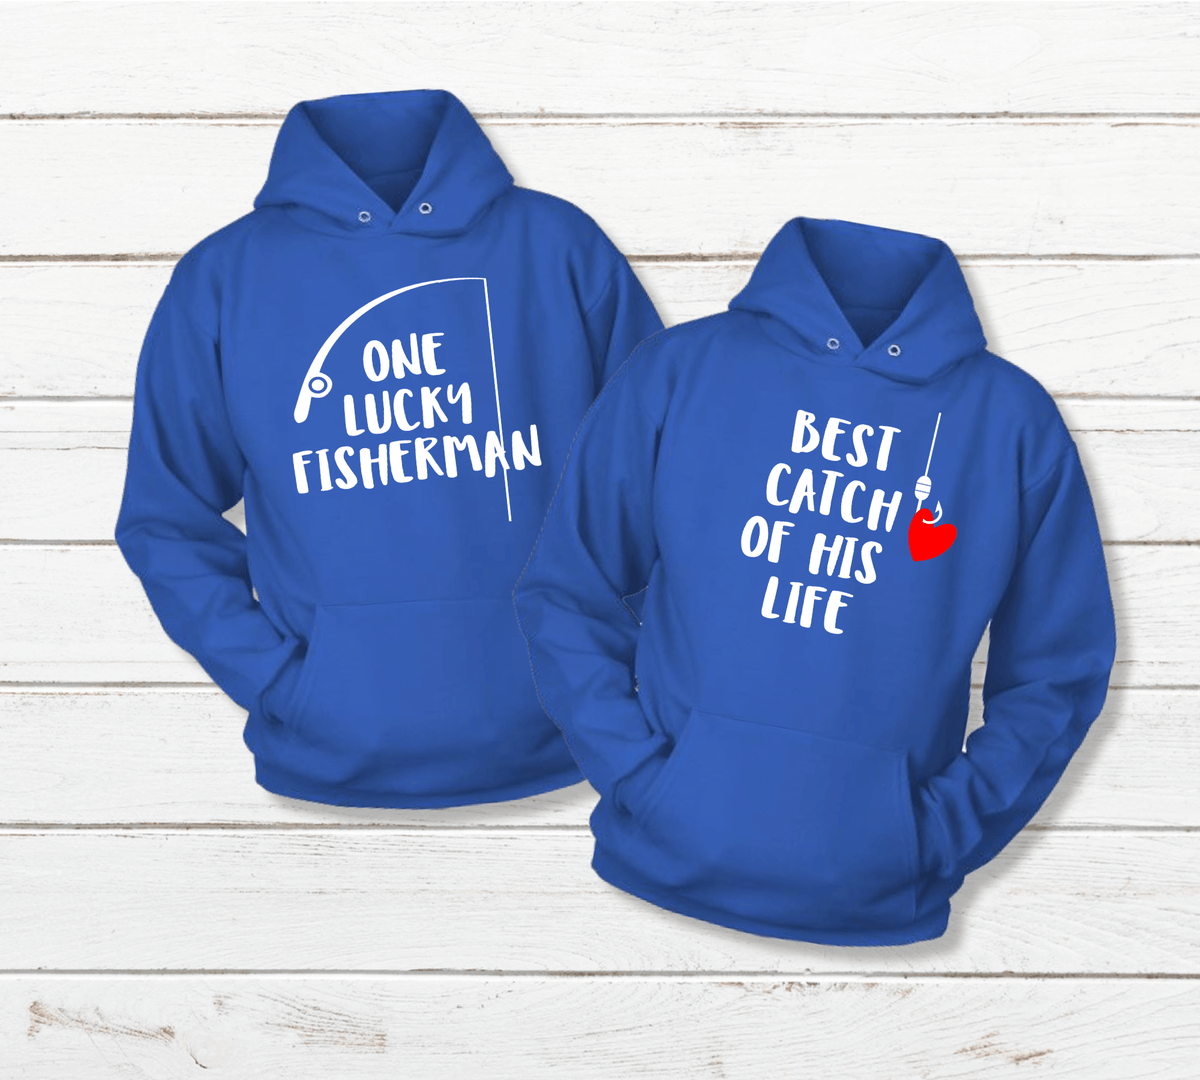 Fishing Matching Couples Hoodies Lucky Fisherman and Best Catch of